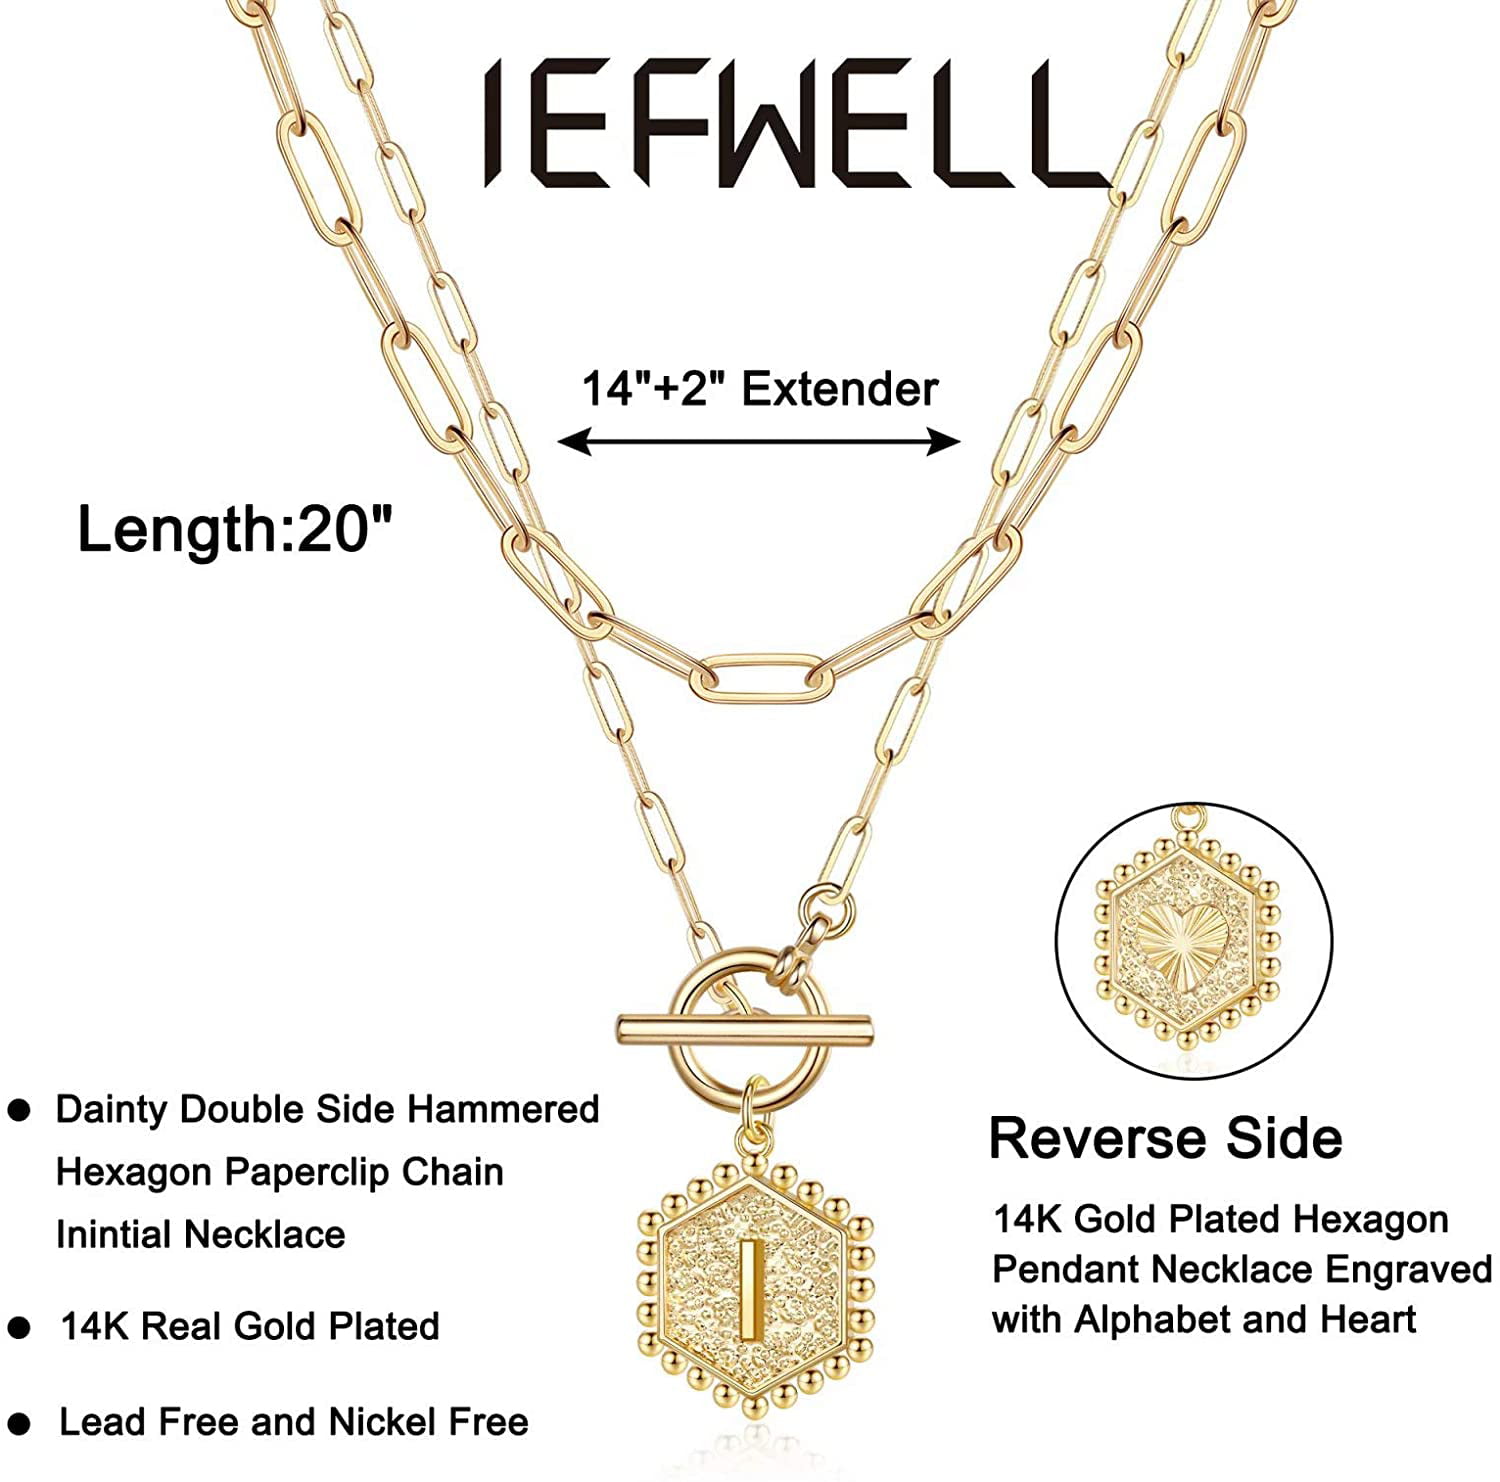 14K Gold Filled Heart Pendant Paperclip Link Chain Layered Necklaces for Women Initial Necklace Layering Necklaces for Girls Jewelry IEFWELL Gold Necklaces for Women Girls 